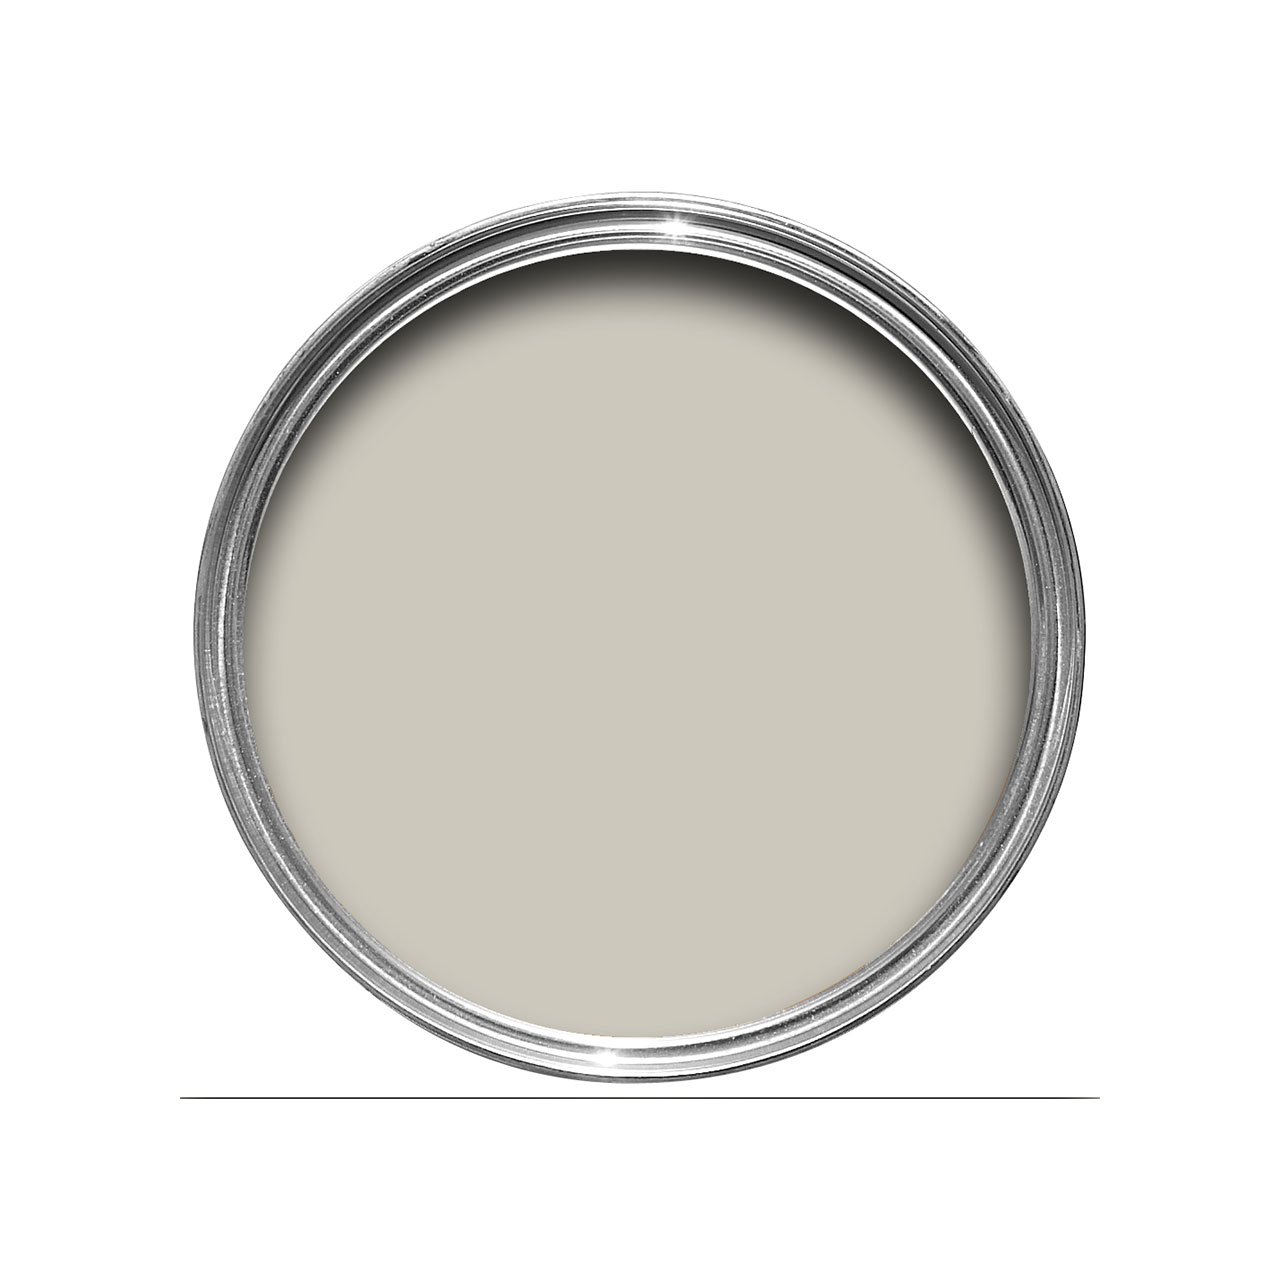 Archive Collection: Shadow Gray (9904)